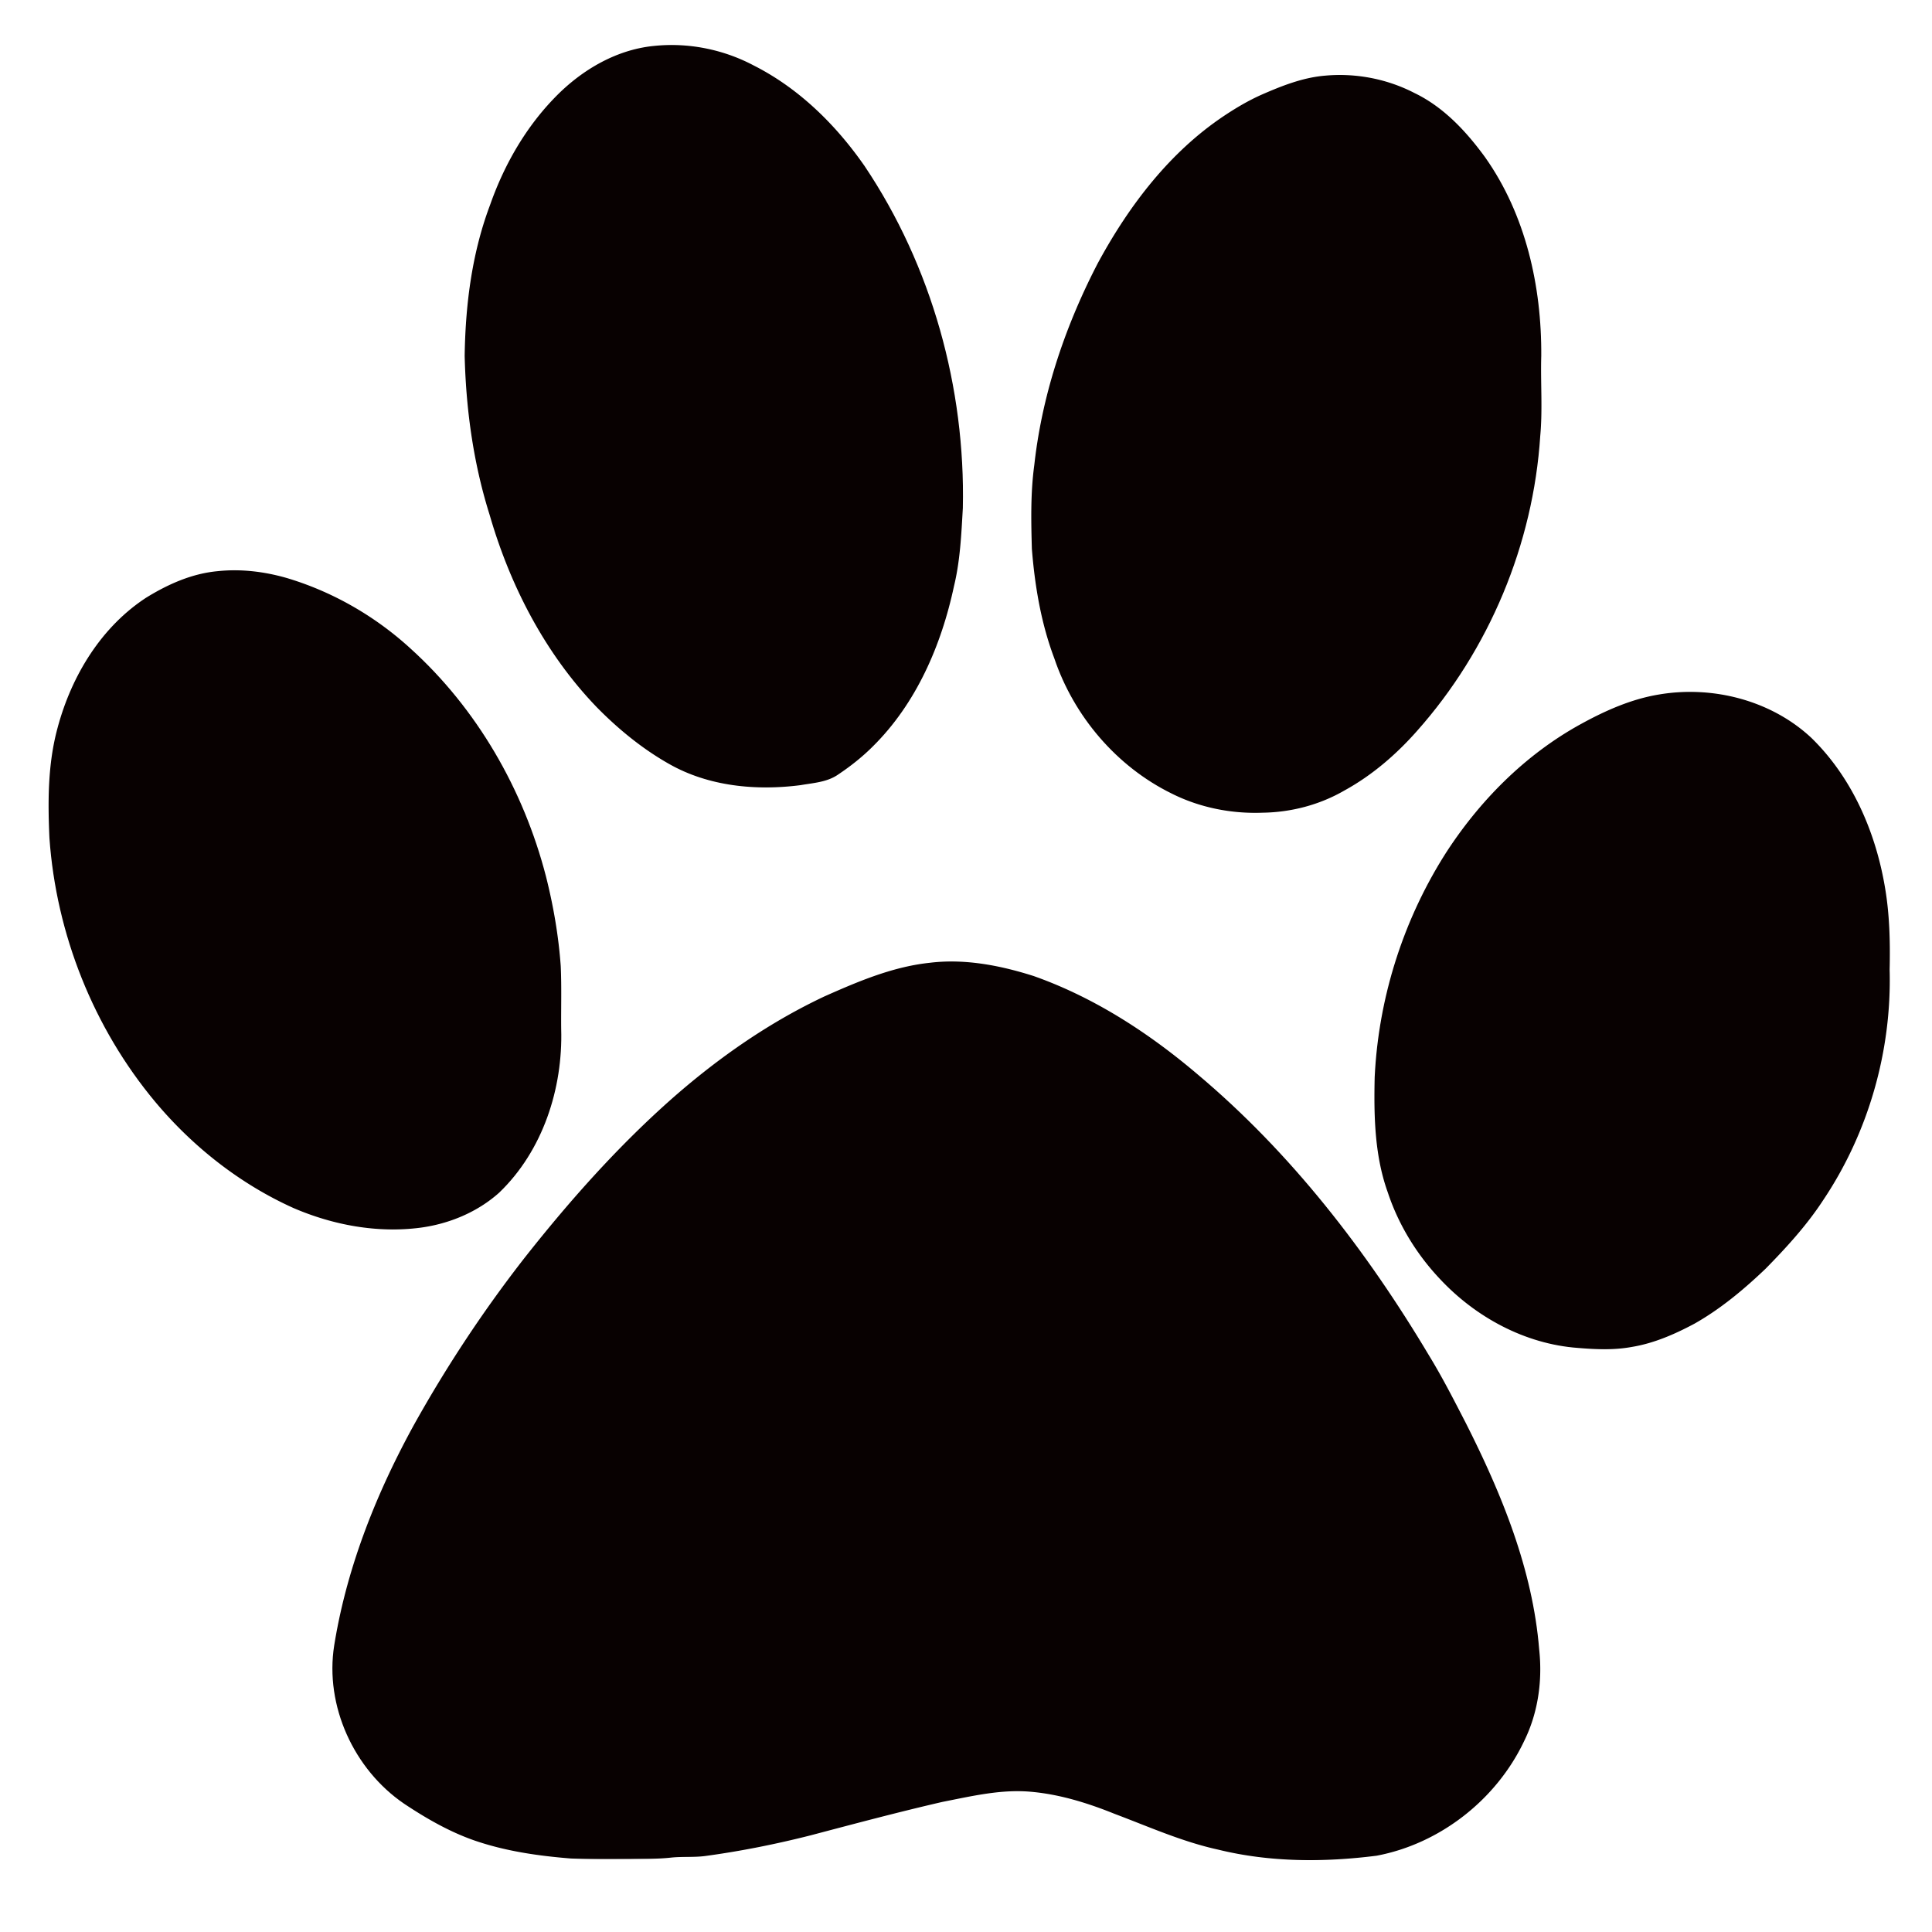 Paw print clipart images